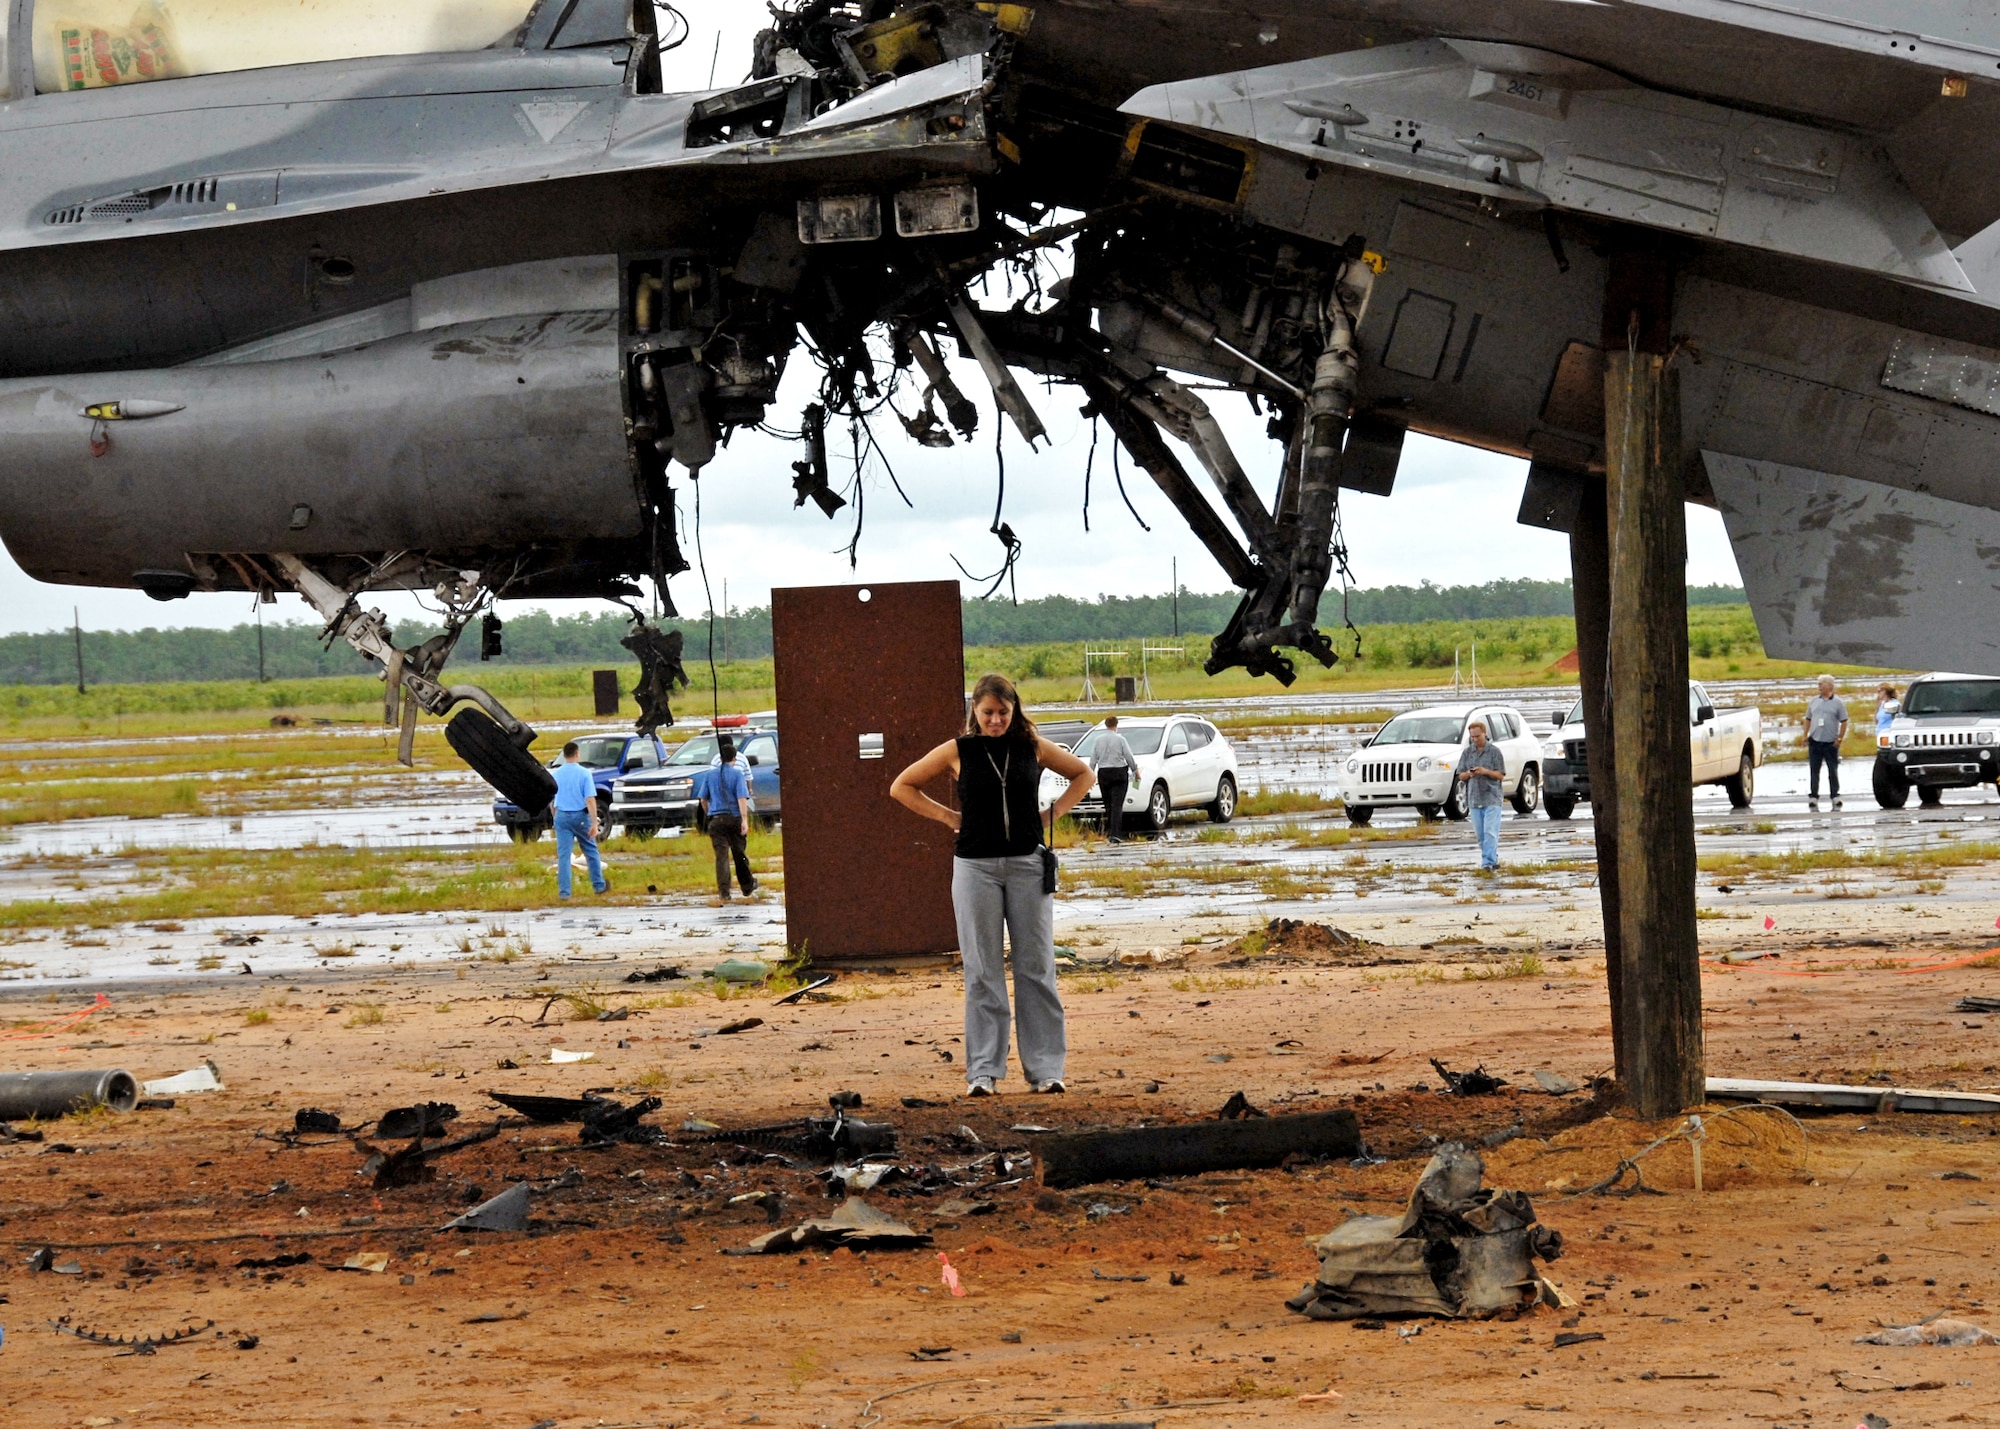 Beth Bartlett surveys the damage after the explosion of an F-16 Fighting Falcon Aug. 19, 2010, on the range at Eglin Air Force Base, Fla. The explosion was a test of the flight termination system to be used in the QF-16, a supersonic reusable full-scale aerial target drone modified from an F-16. The purpose of the test was to demonstrate that the FTS design will be sufficient to immediately terminate the flight of a QF-16, as well as to determine a range safety debris footprint. Ms. Bartlett is a test engineer for the flight termination system test. (U.S. Air Force photo/Samuel King Jr.)